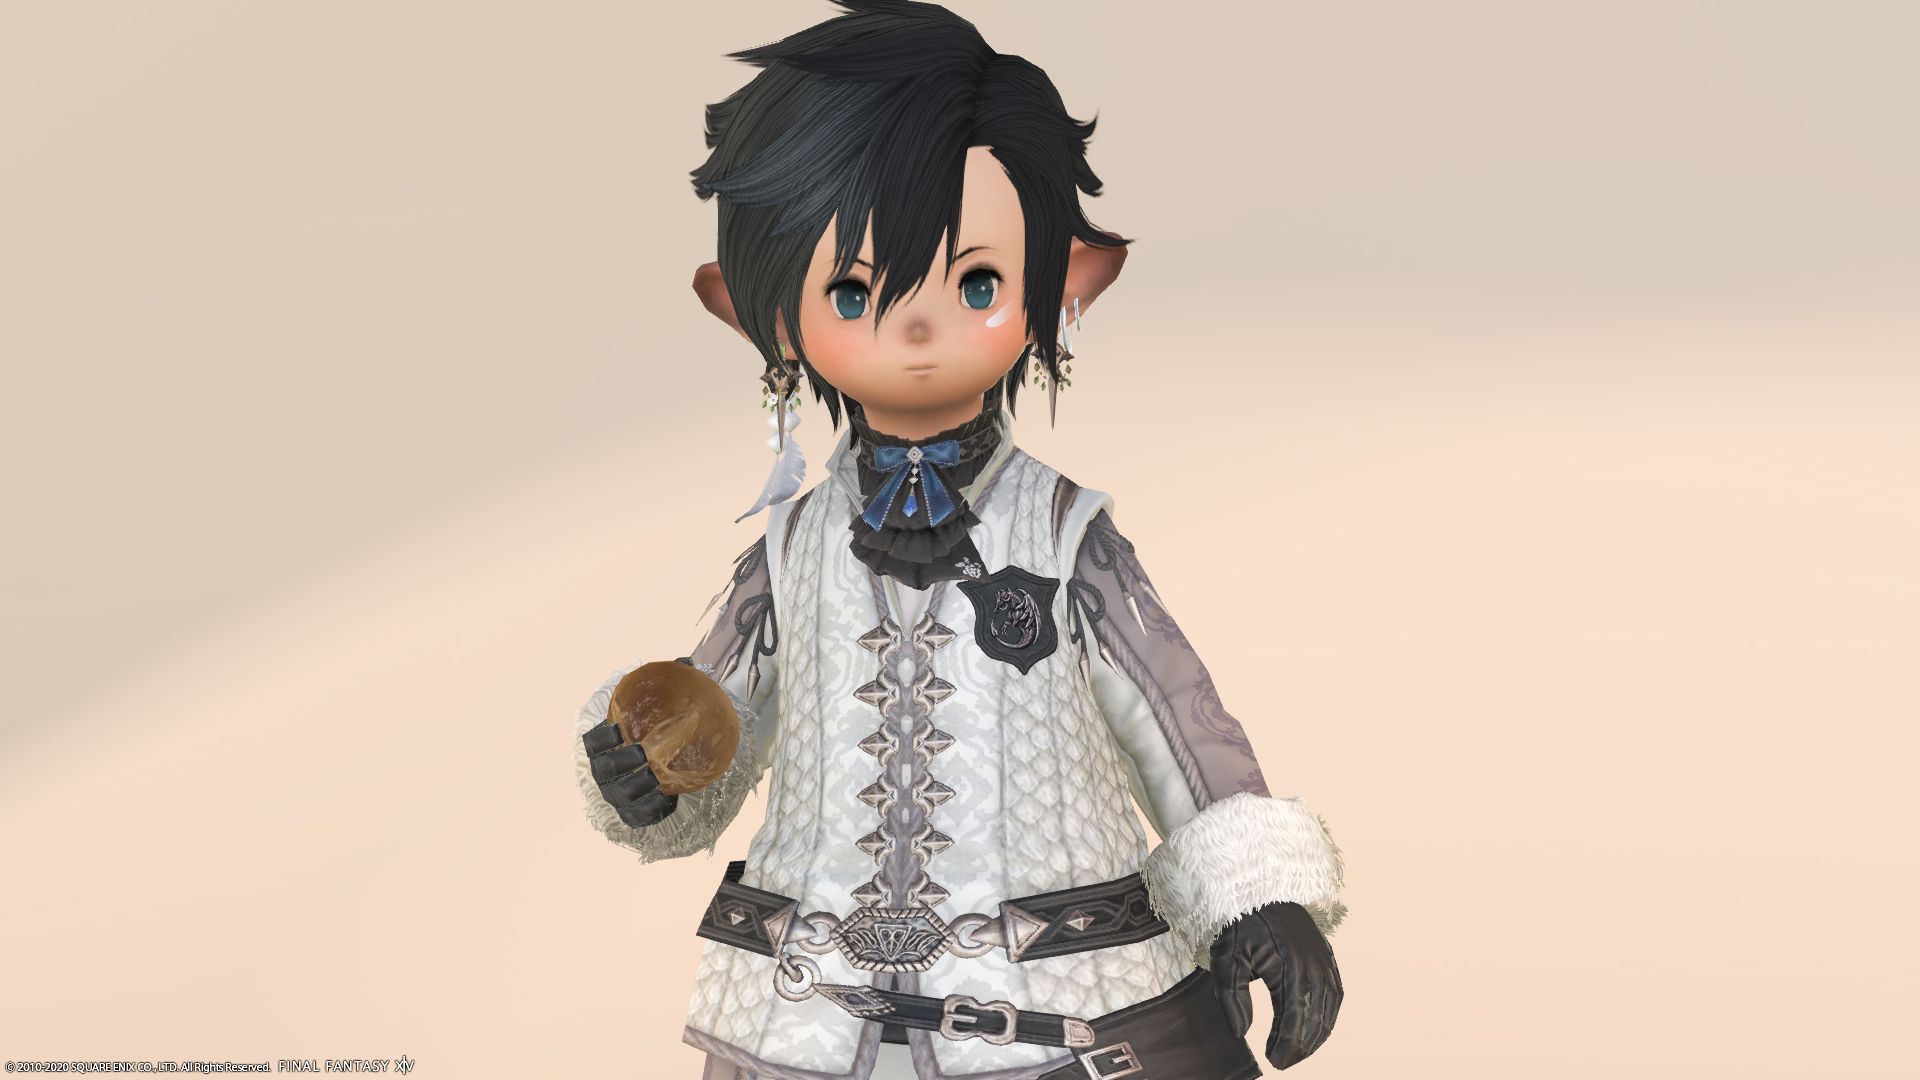 Carrot Necklaces - The Glamour Dresser : Final Fantasy XIV Mods and More